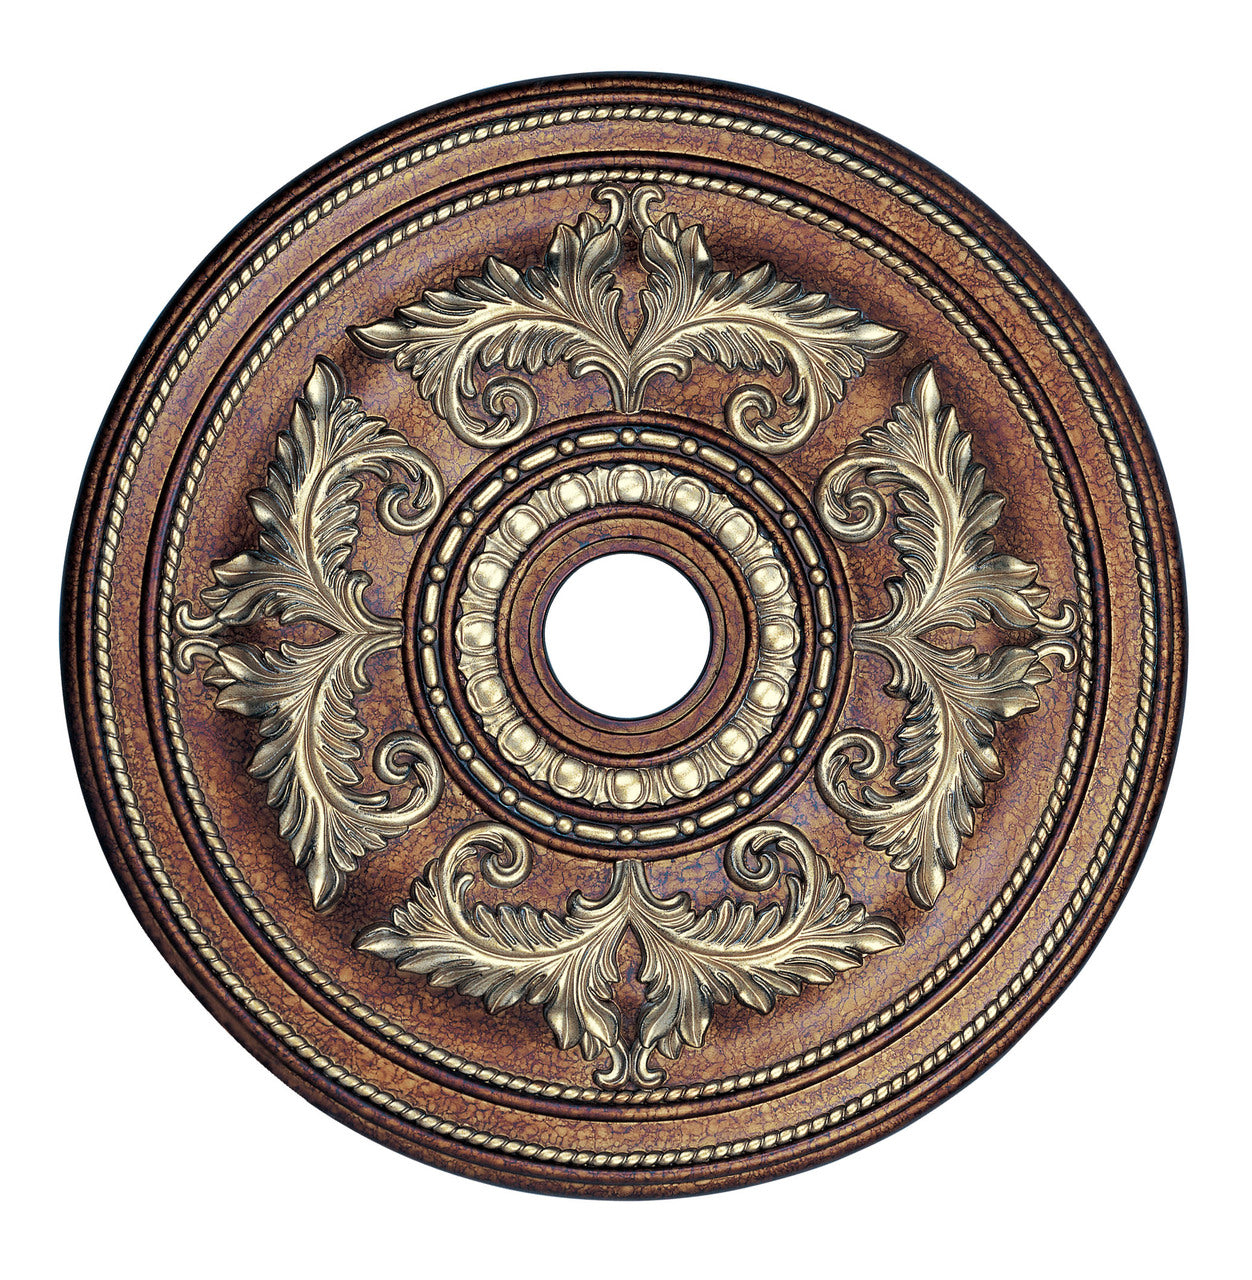 LIVEX Lighting 8210-64 Ceiling Medallion in Palacial Bronze with Gilded Accents